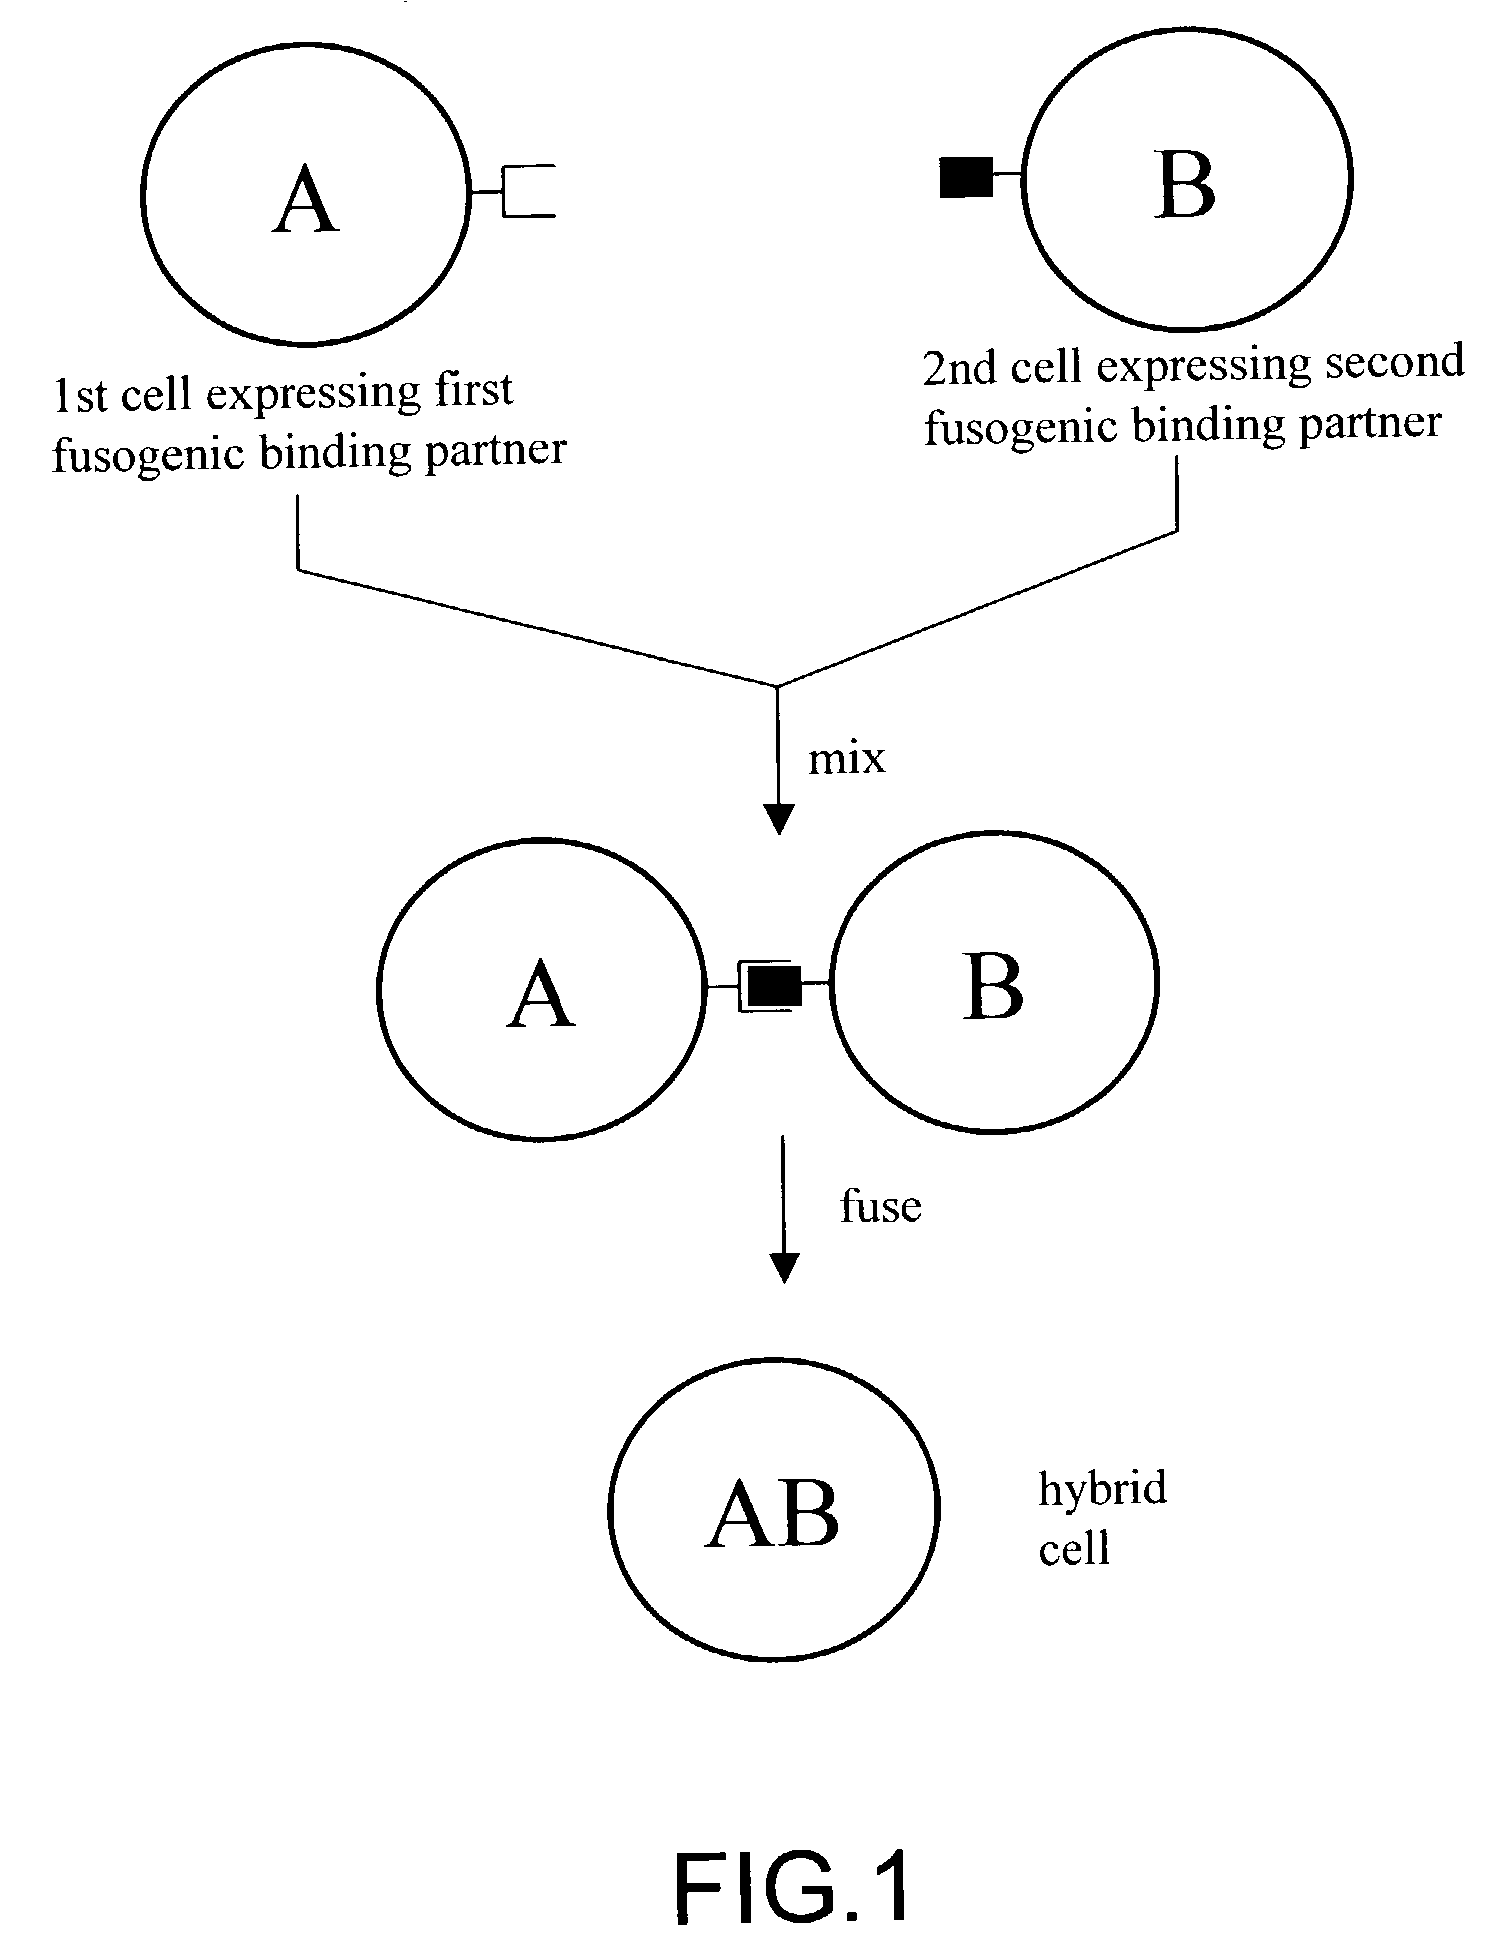 Cell fusion method